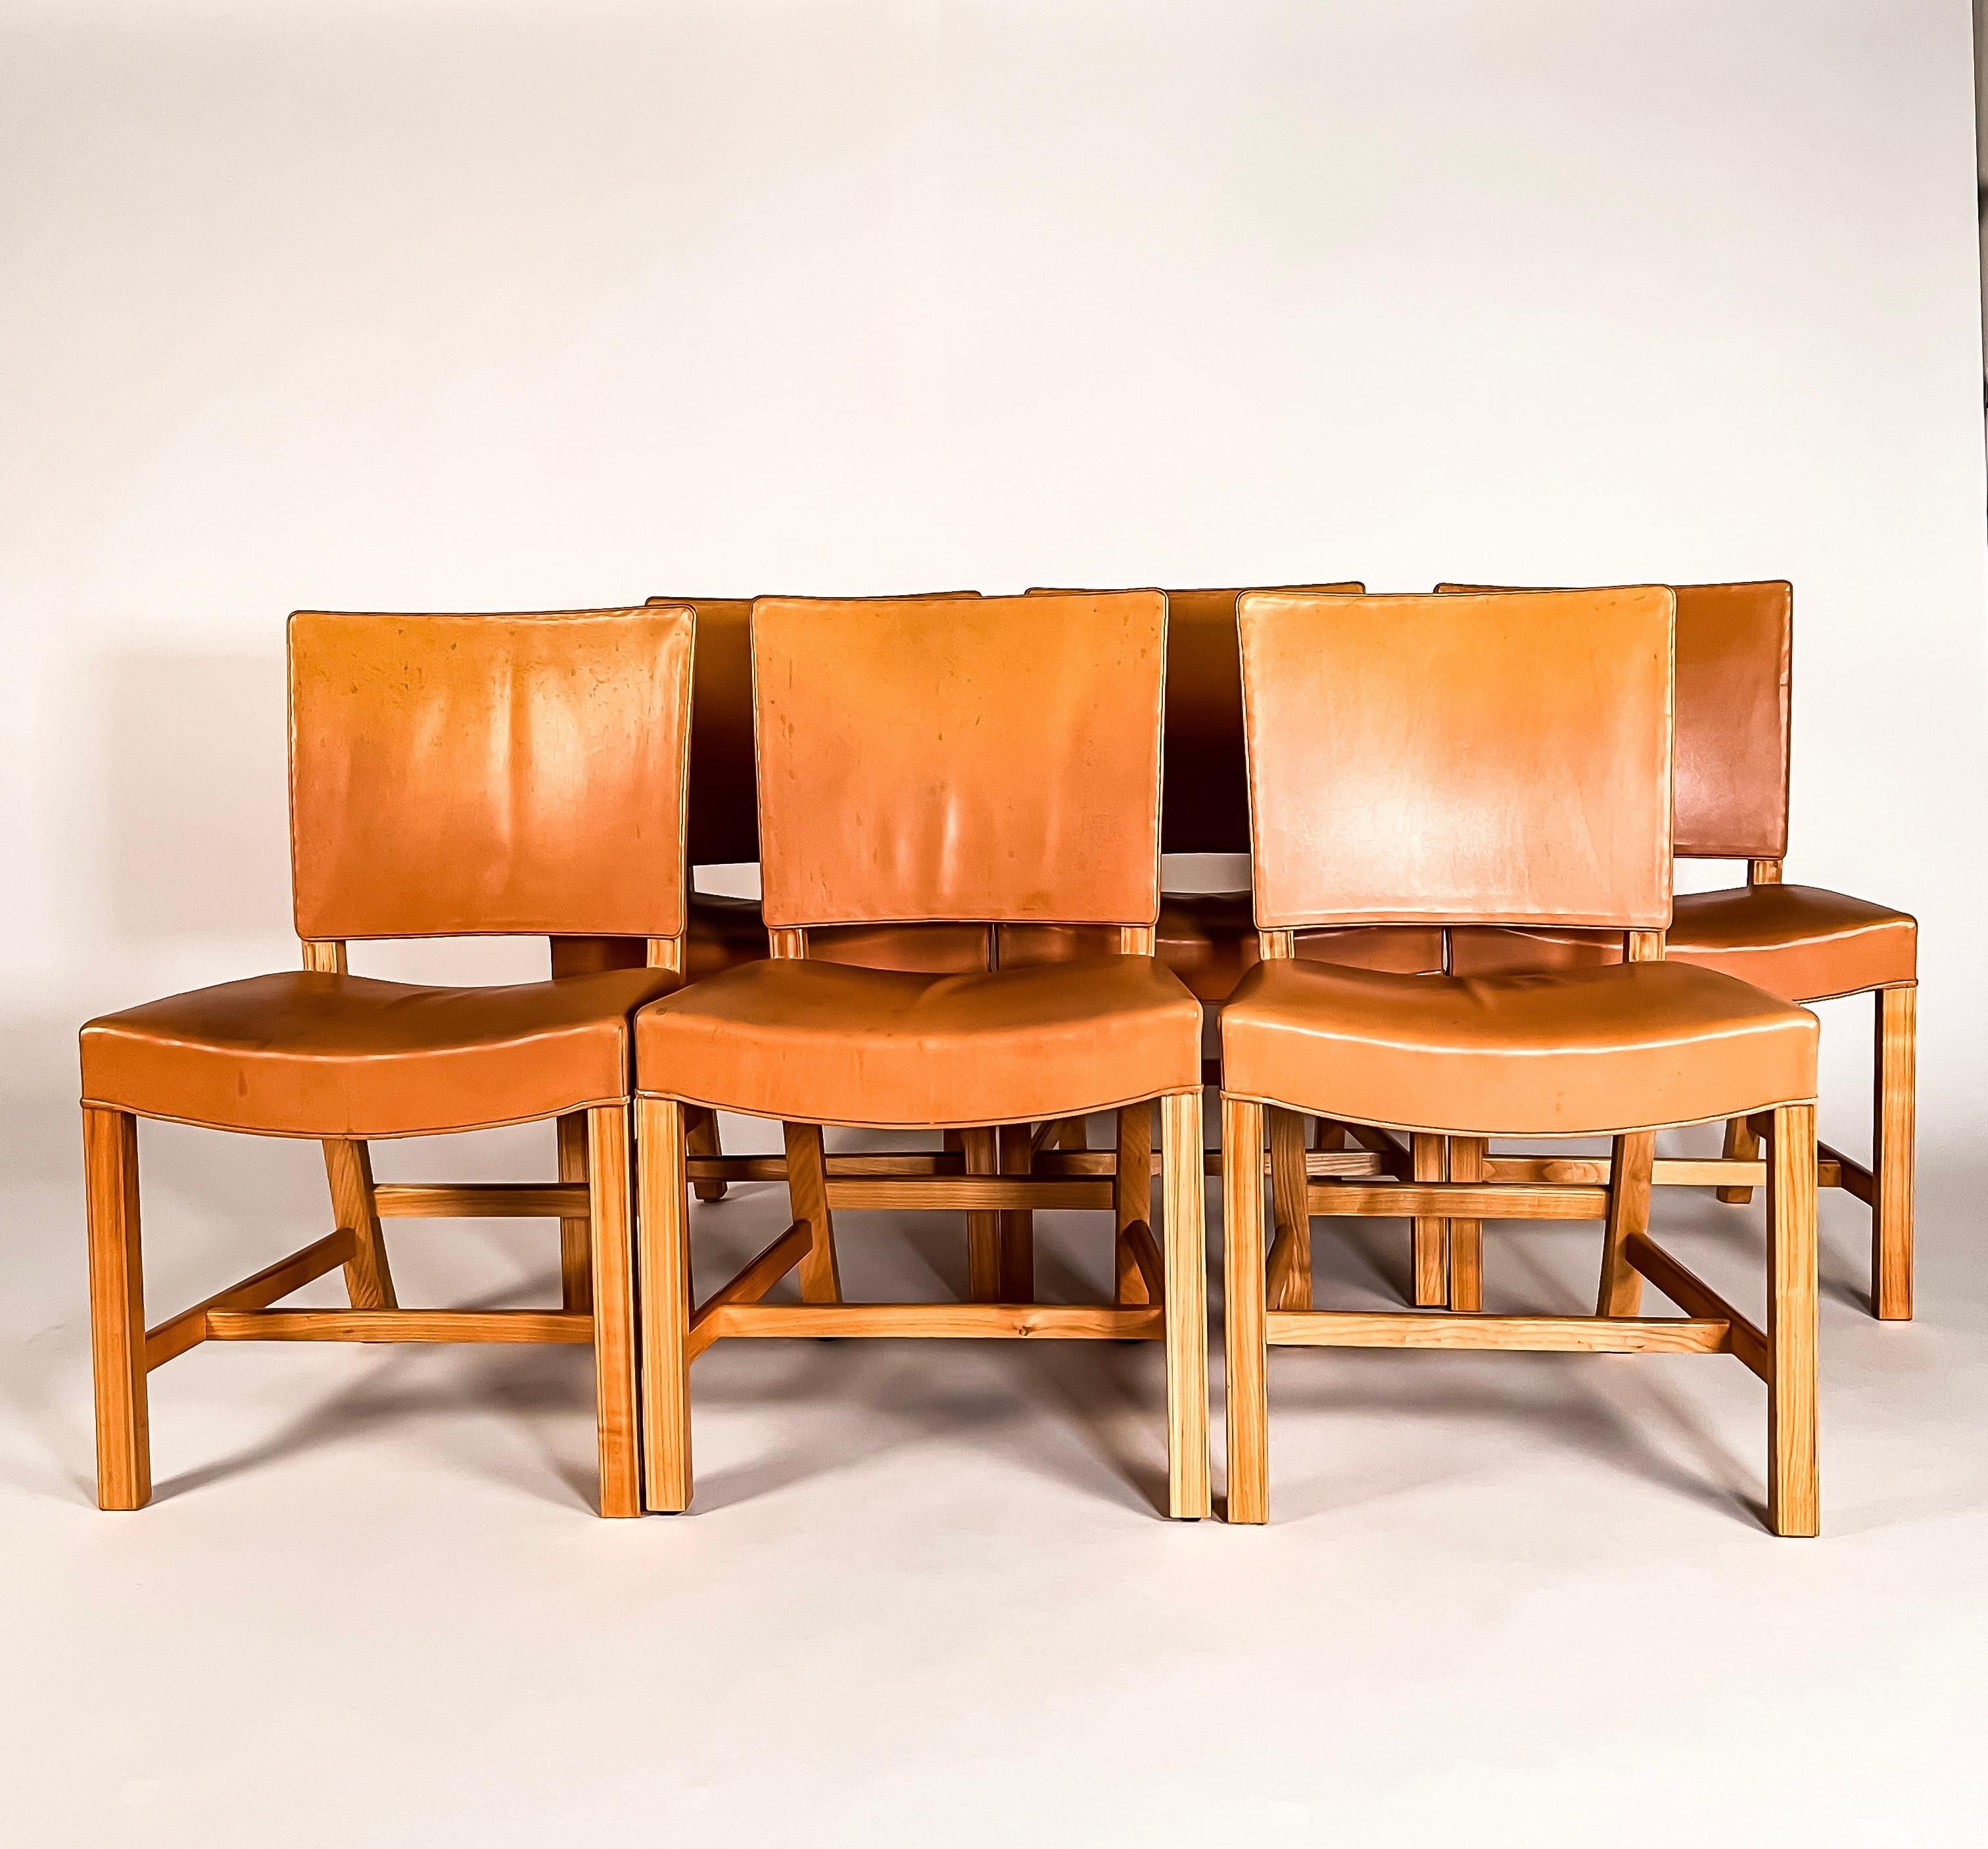 20th Century Red Chairs, a Set of Six by Kaare Klint